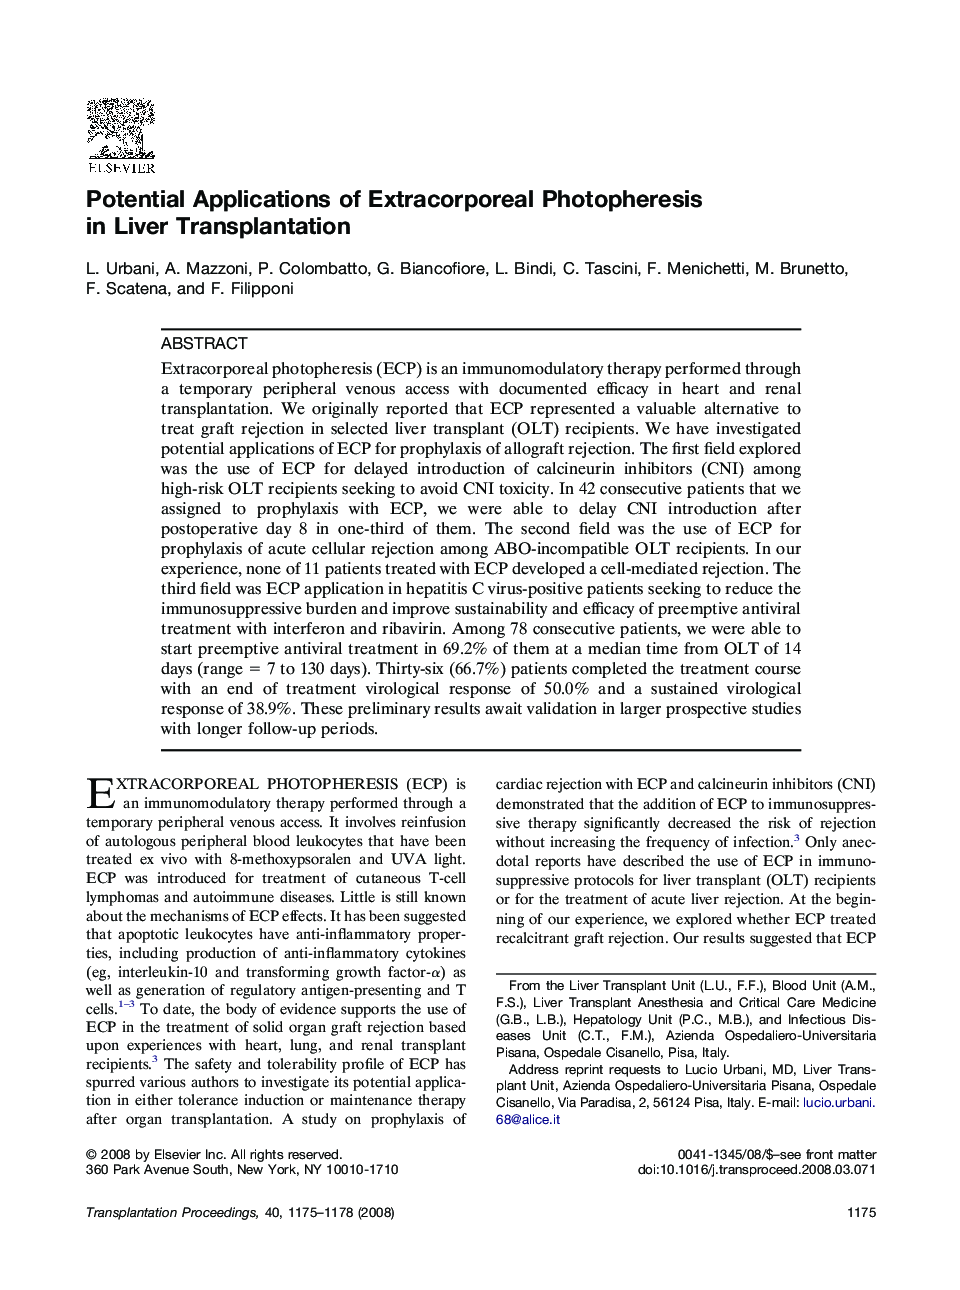 Potential Applications of Extracorporeal Photopheresis in Liver Transplantation